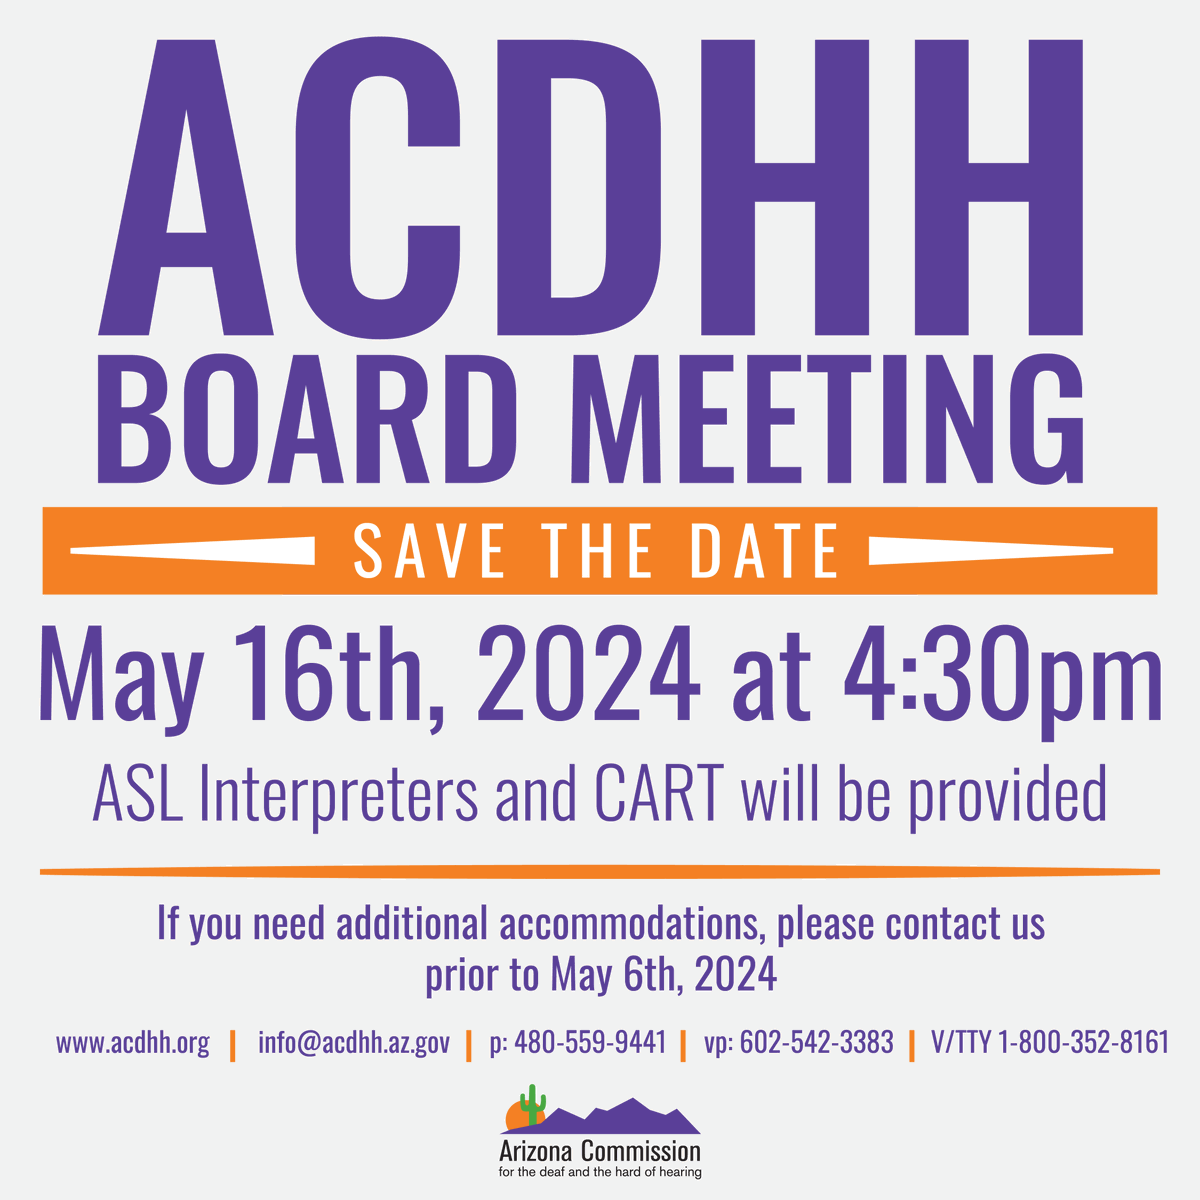 The ACDHH Board Meeting will be taking place virtually on May 16th, 2024 at 4:30 PM. Requests should be made before May 6th to allow time to arrange the accommodations. The meeting will have sign language interpreters and captioning.